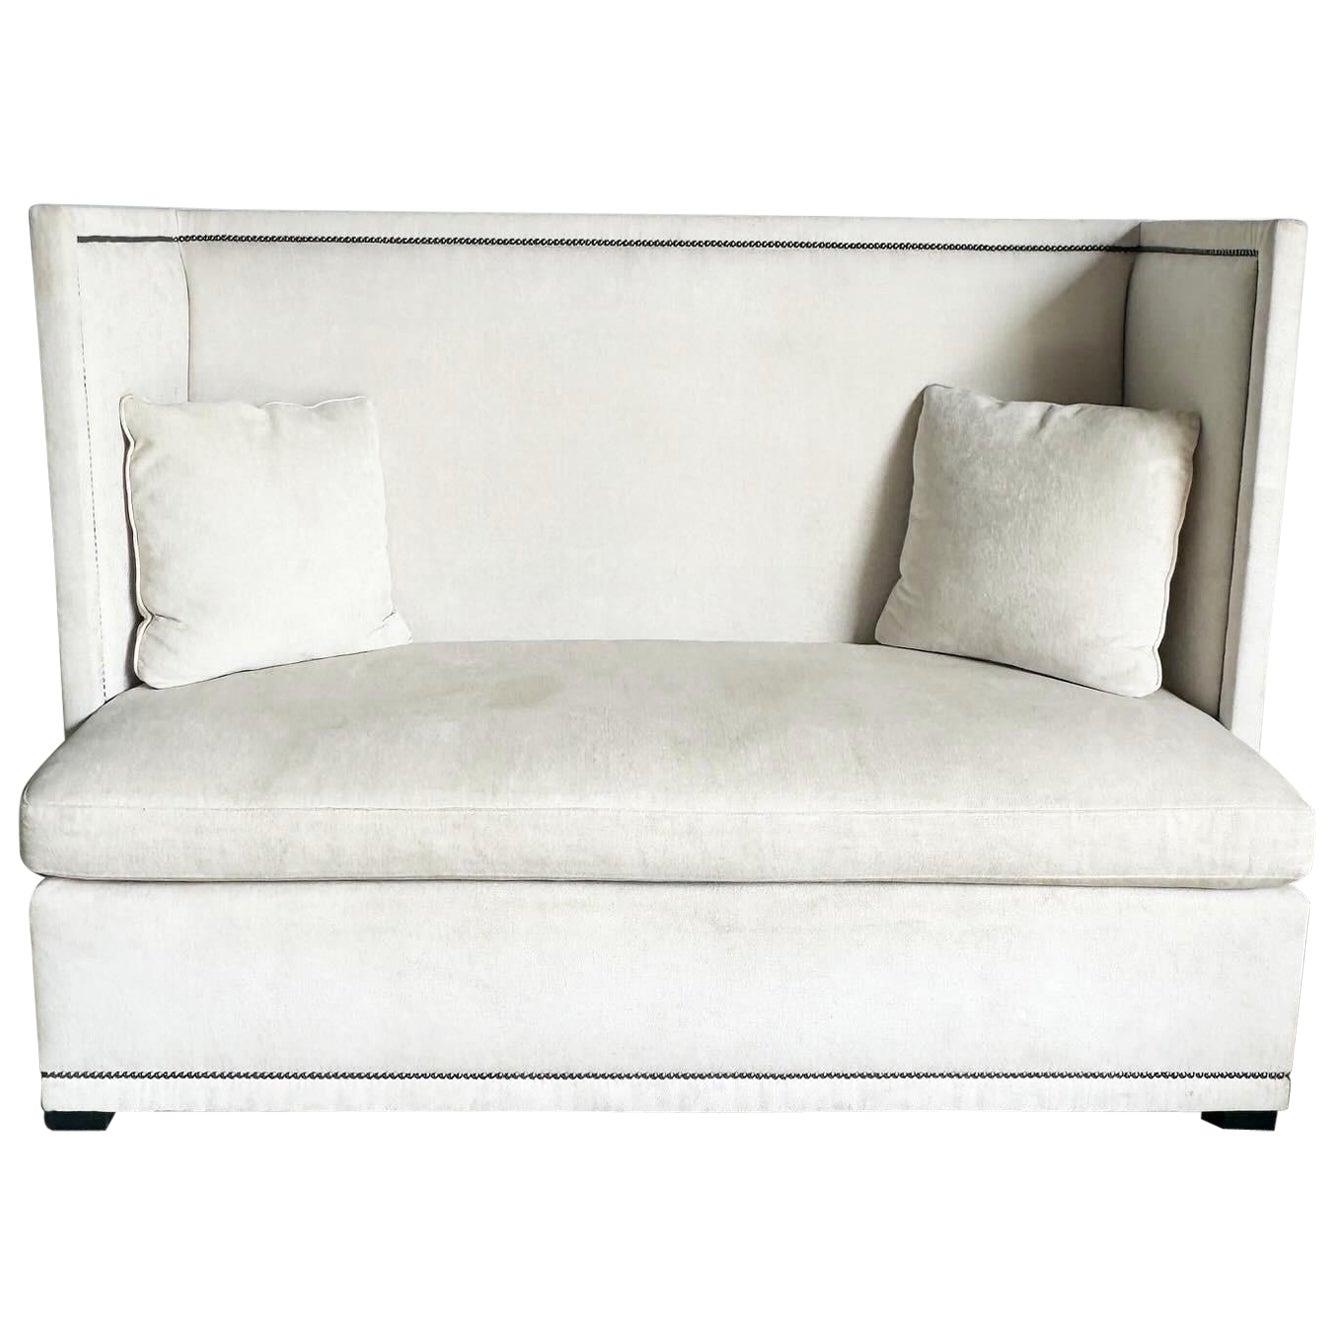 Bernhardt Ivory Fabric With Brushed Metal Nails Marcourt Banquette Sofa For Sale